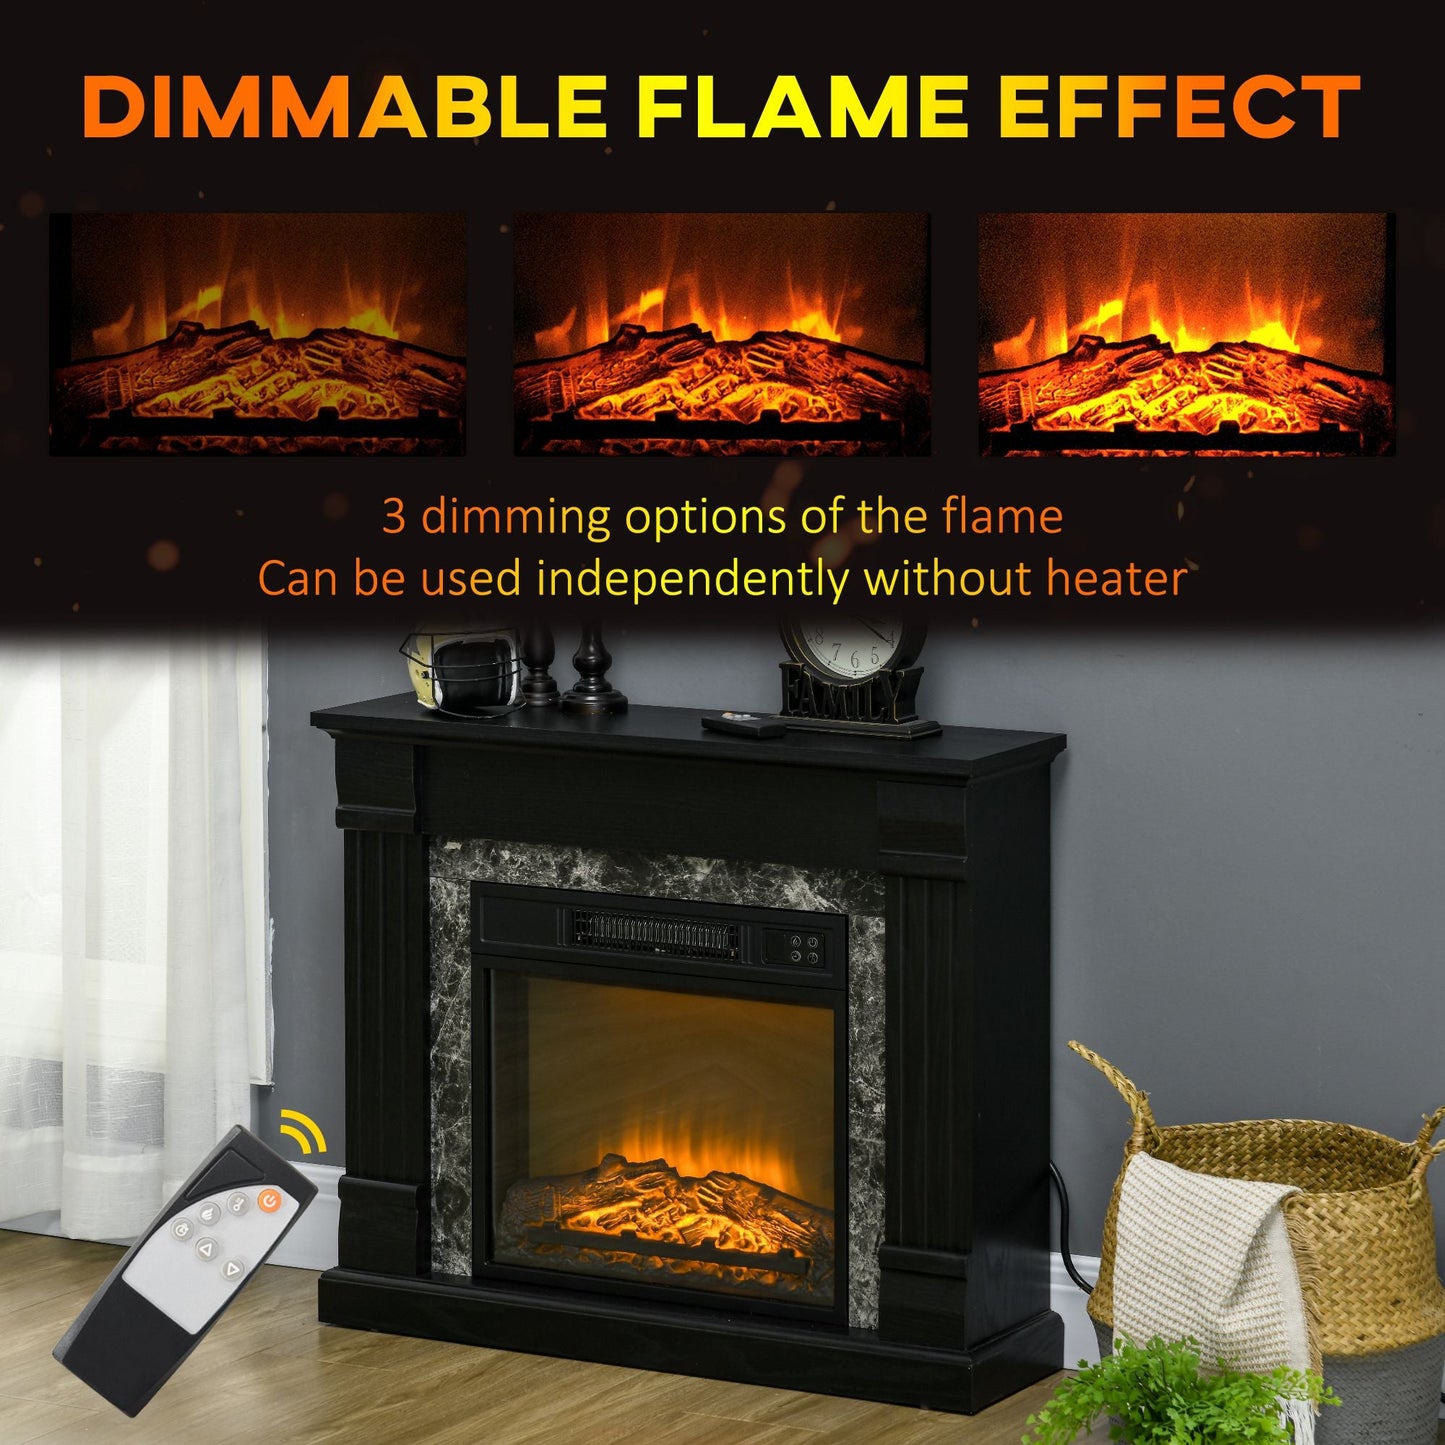 Electric Fireplace Mantel Wood Surround, Freestanding Fireplace Heater with Realistic Flame, Adjustable Temperature, Timer, Overheating Protection and Remote Control, Black at Gallery Canada